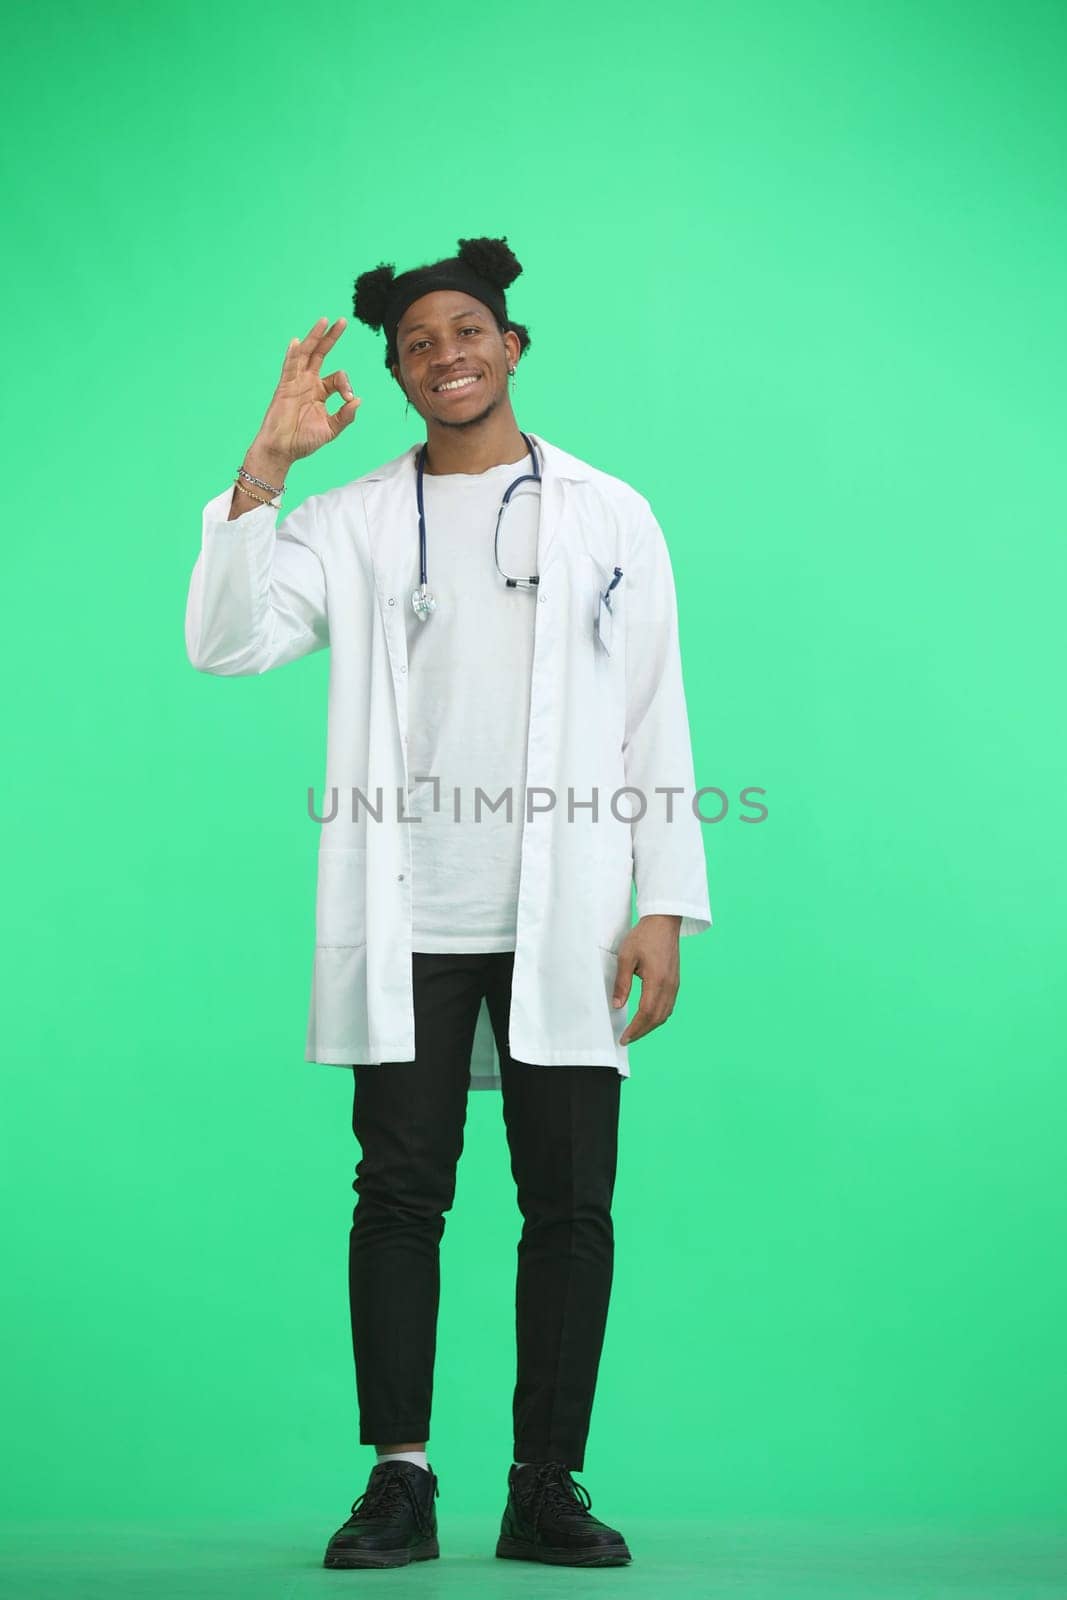 The doctor, in full height, on a green background, shows the ok sign.